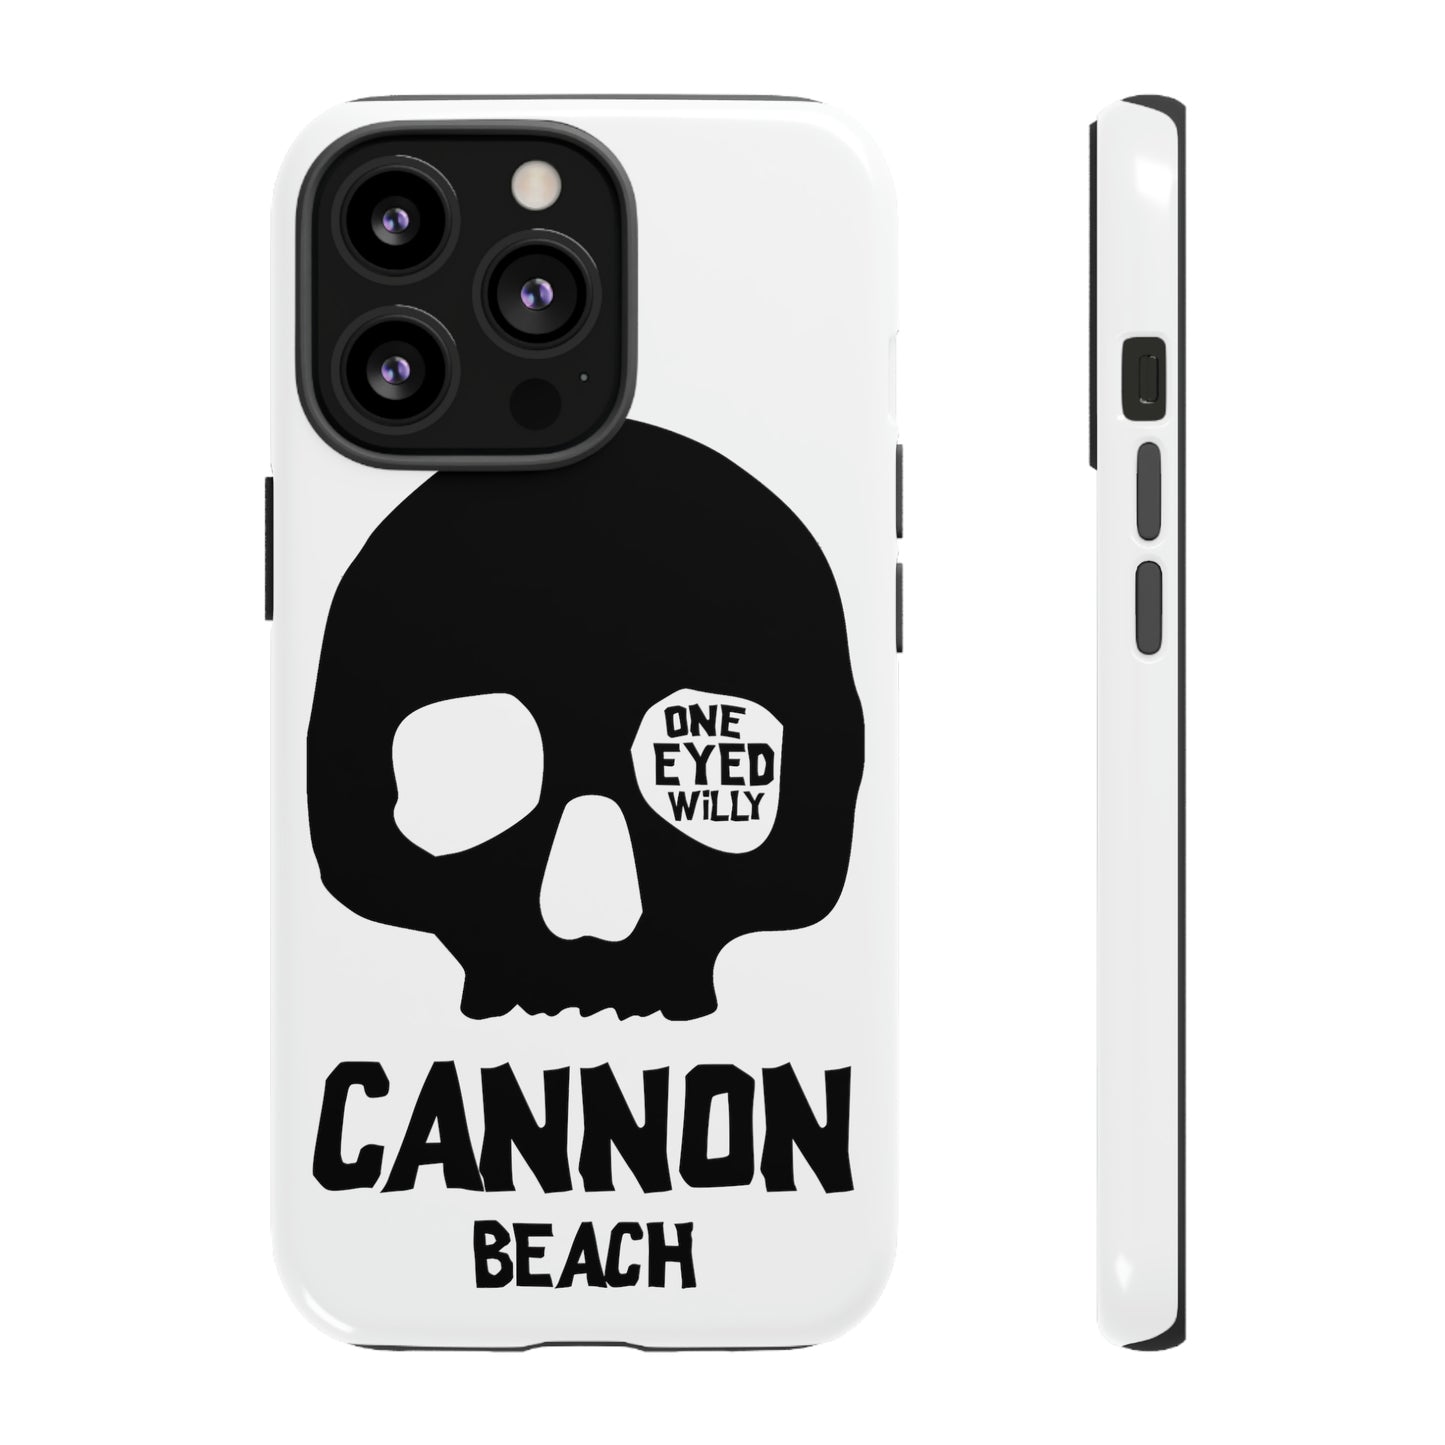 CANNON BEACH ONE EYED WILLY Tough Cases